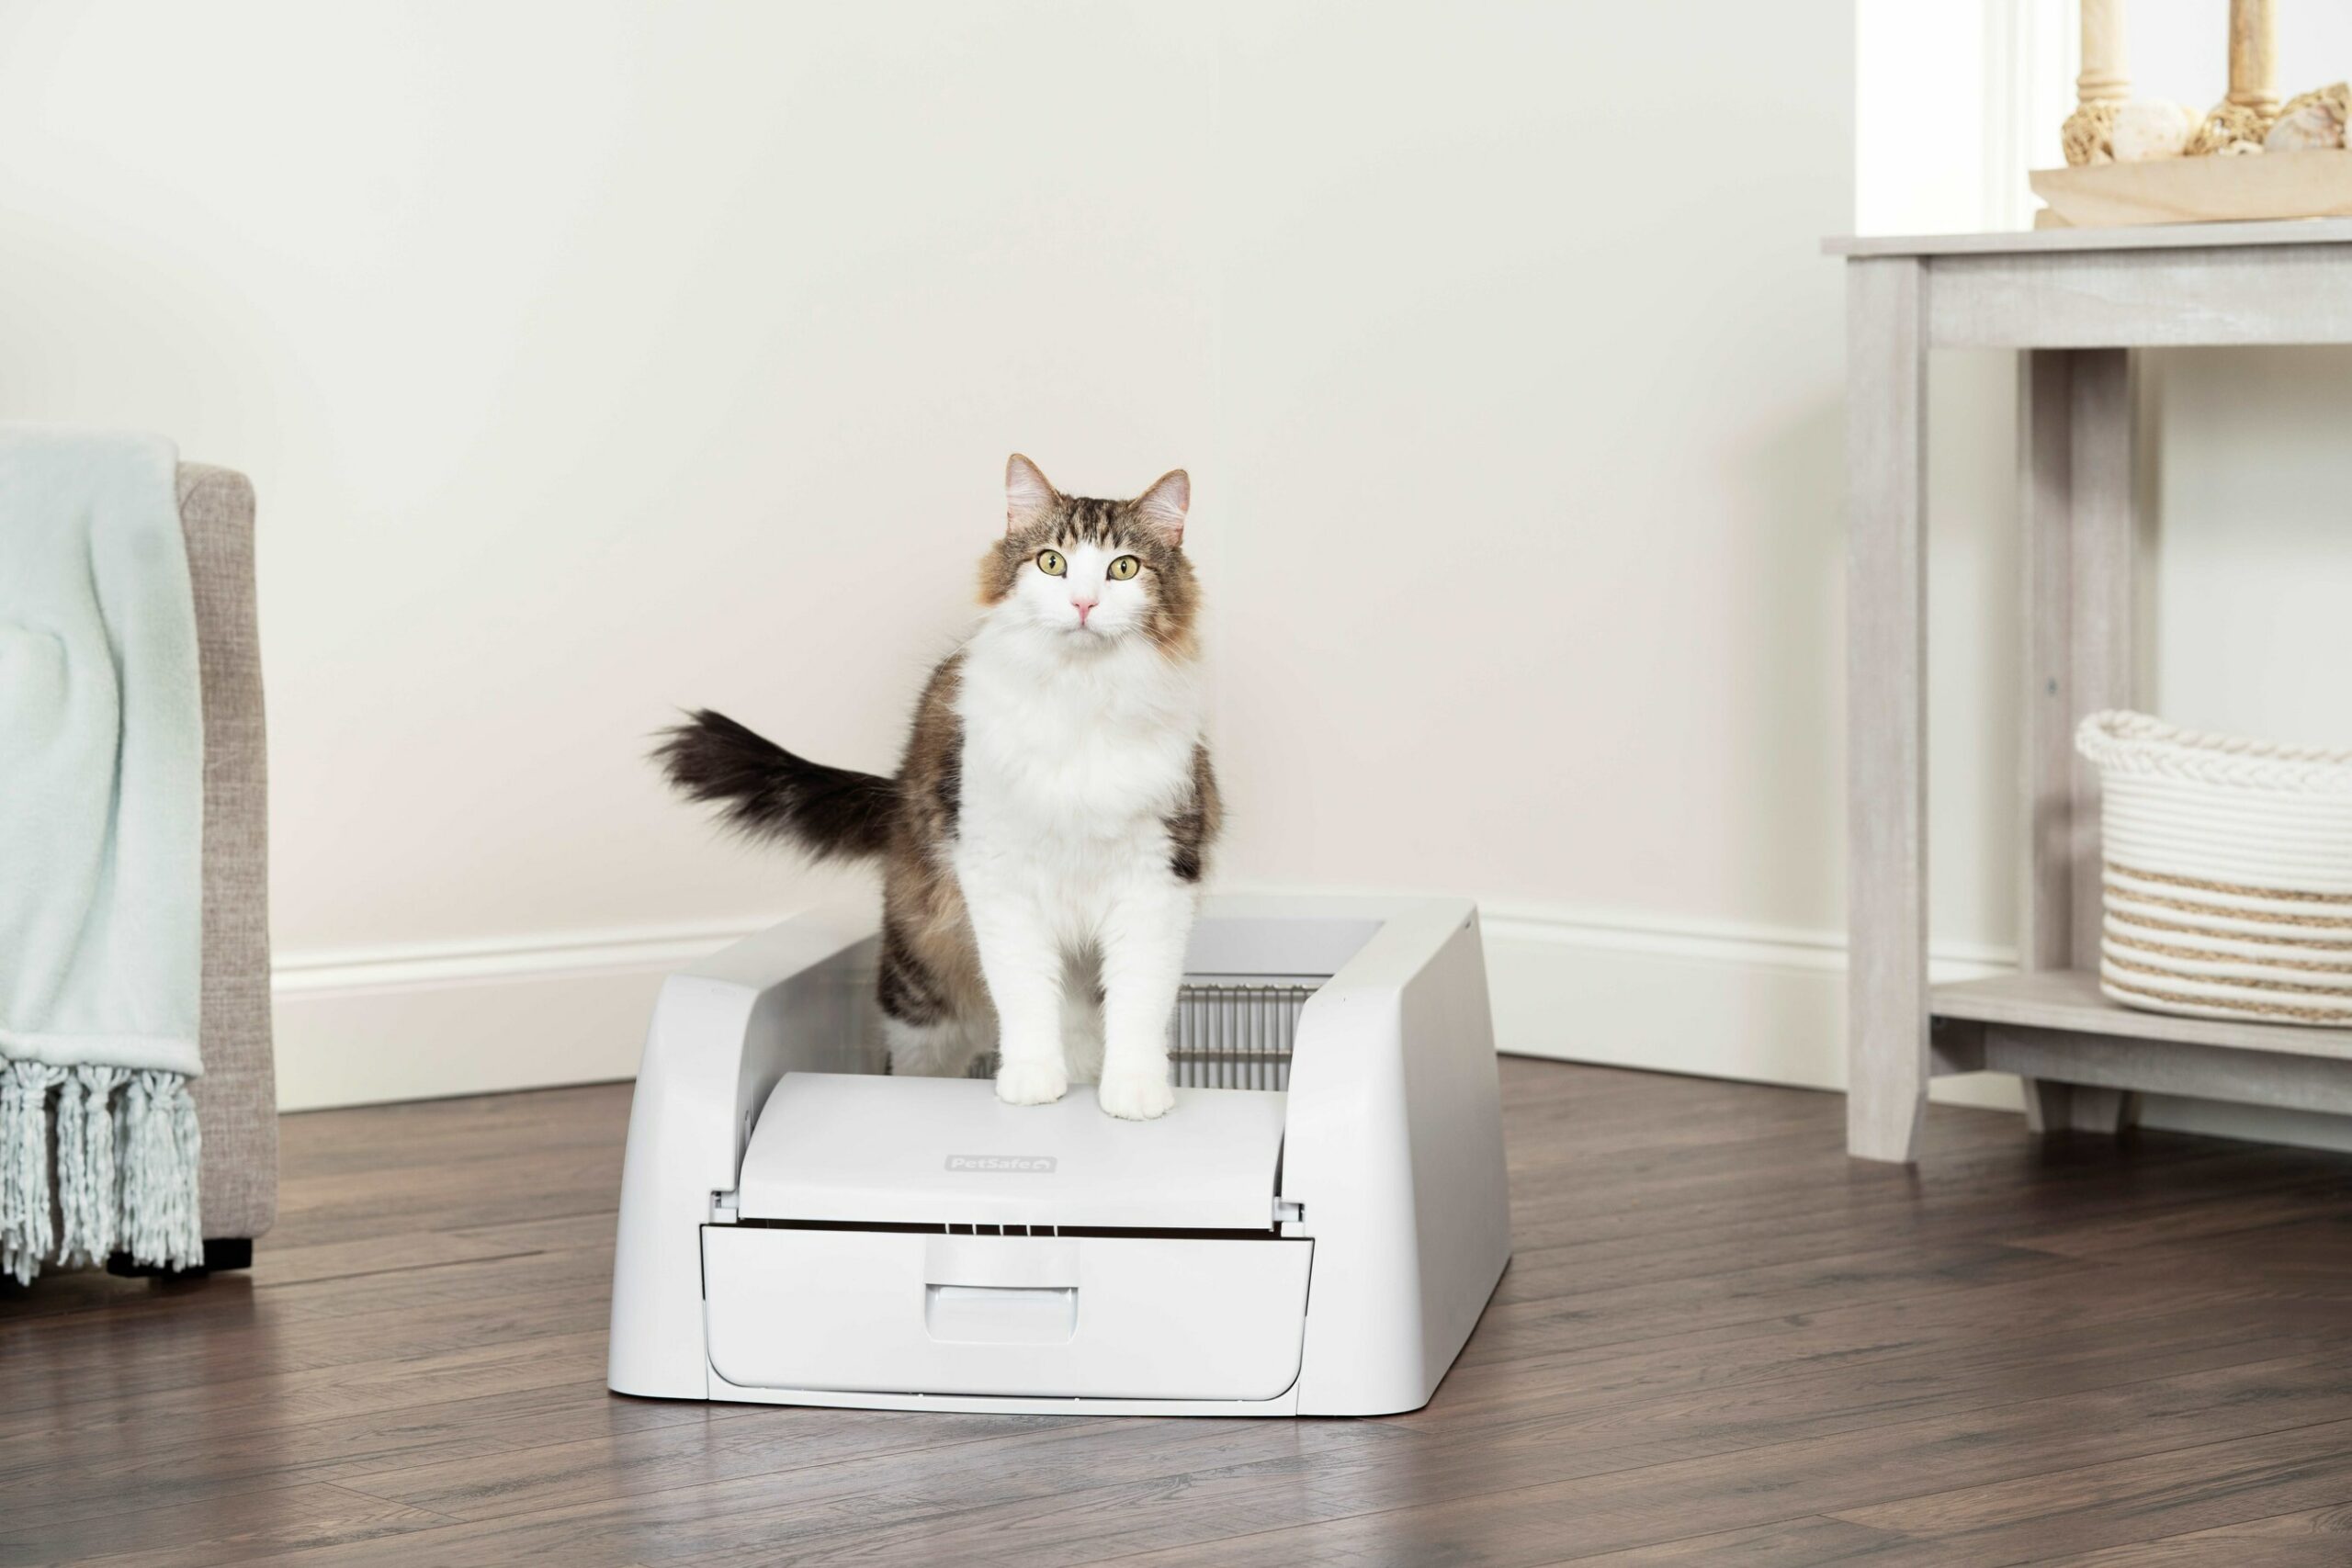 PetSafe Introduces ScoopFree Clumping Self-Cleaning Litter Box